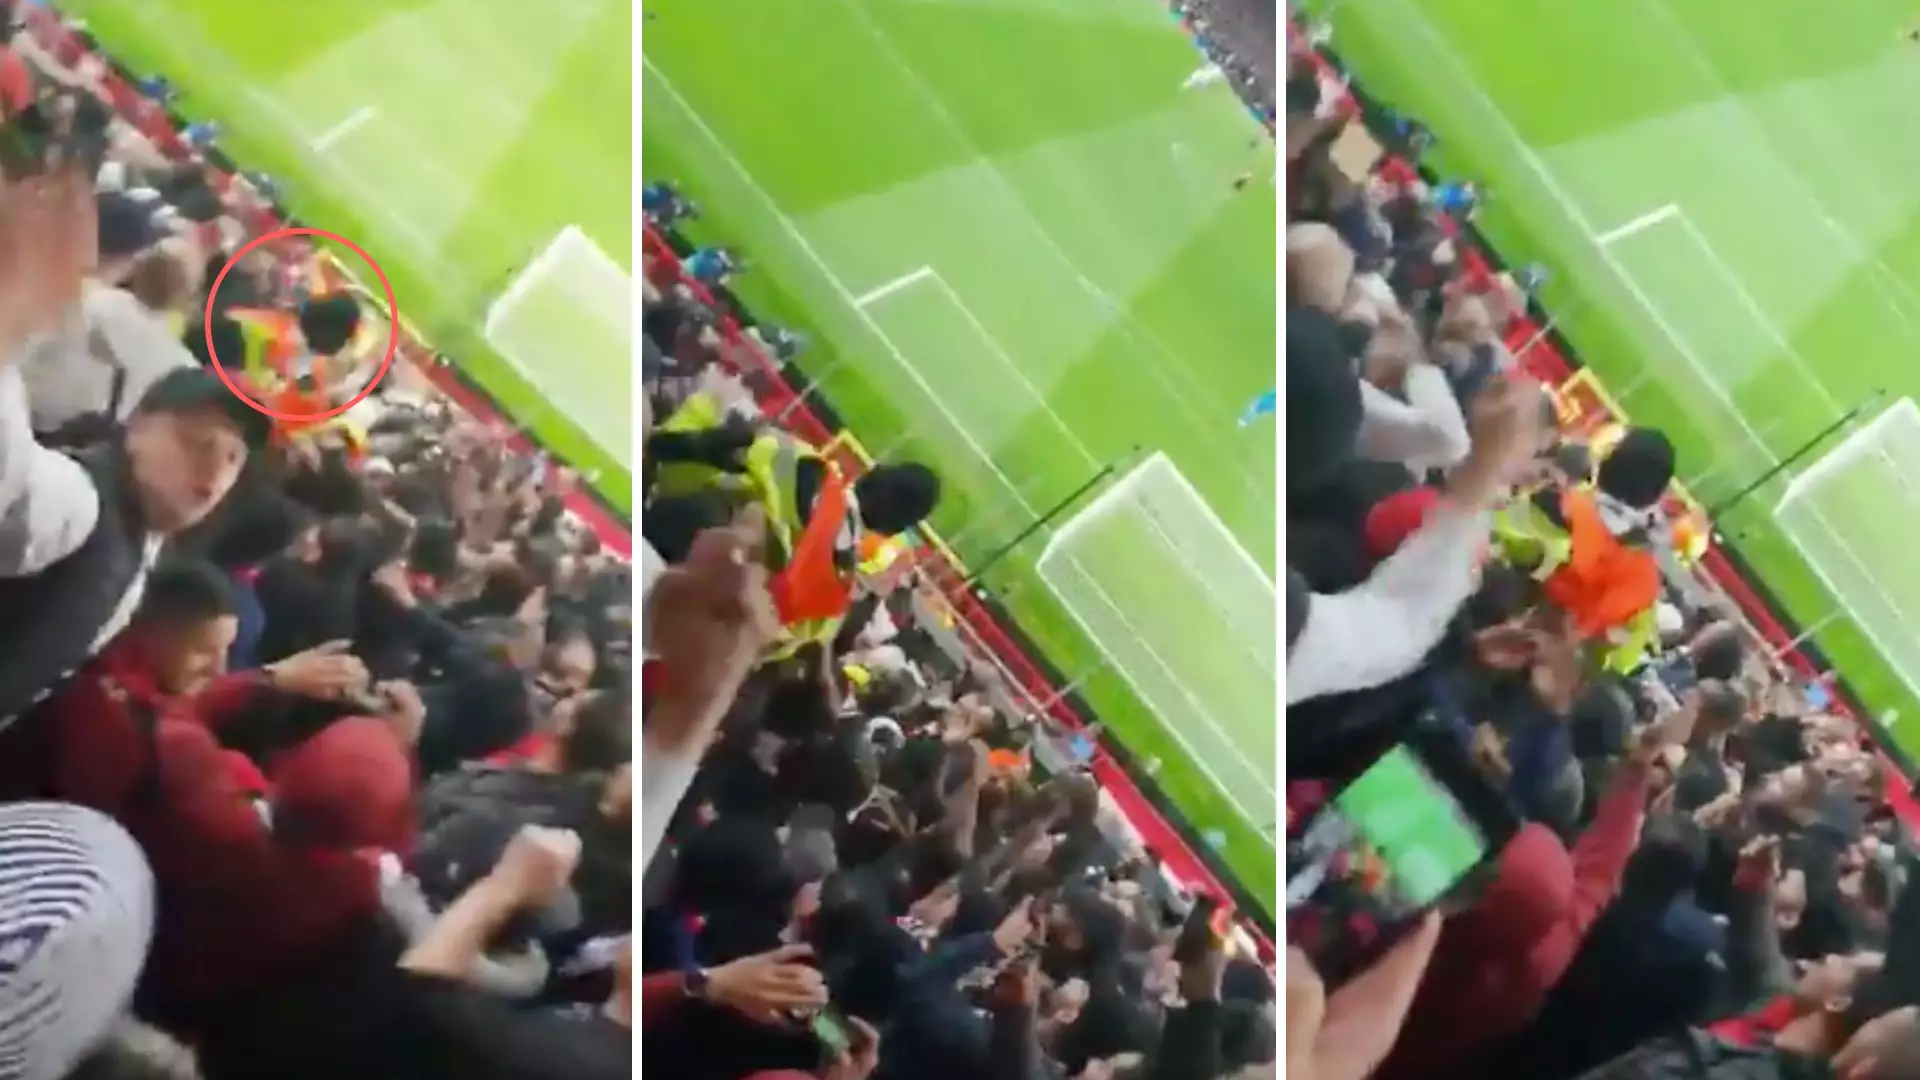 PSG Fans Give Manchester United Steward A Helping Hand With Brief Crowd Surfing